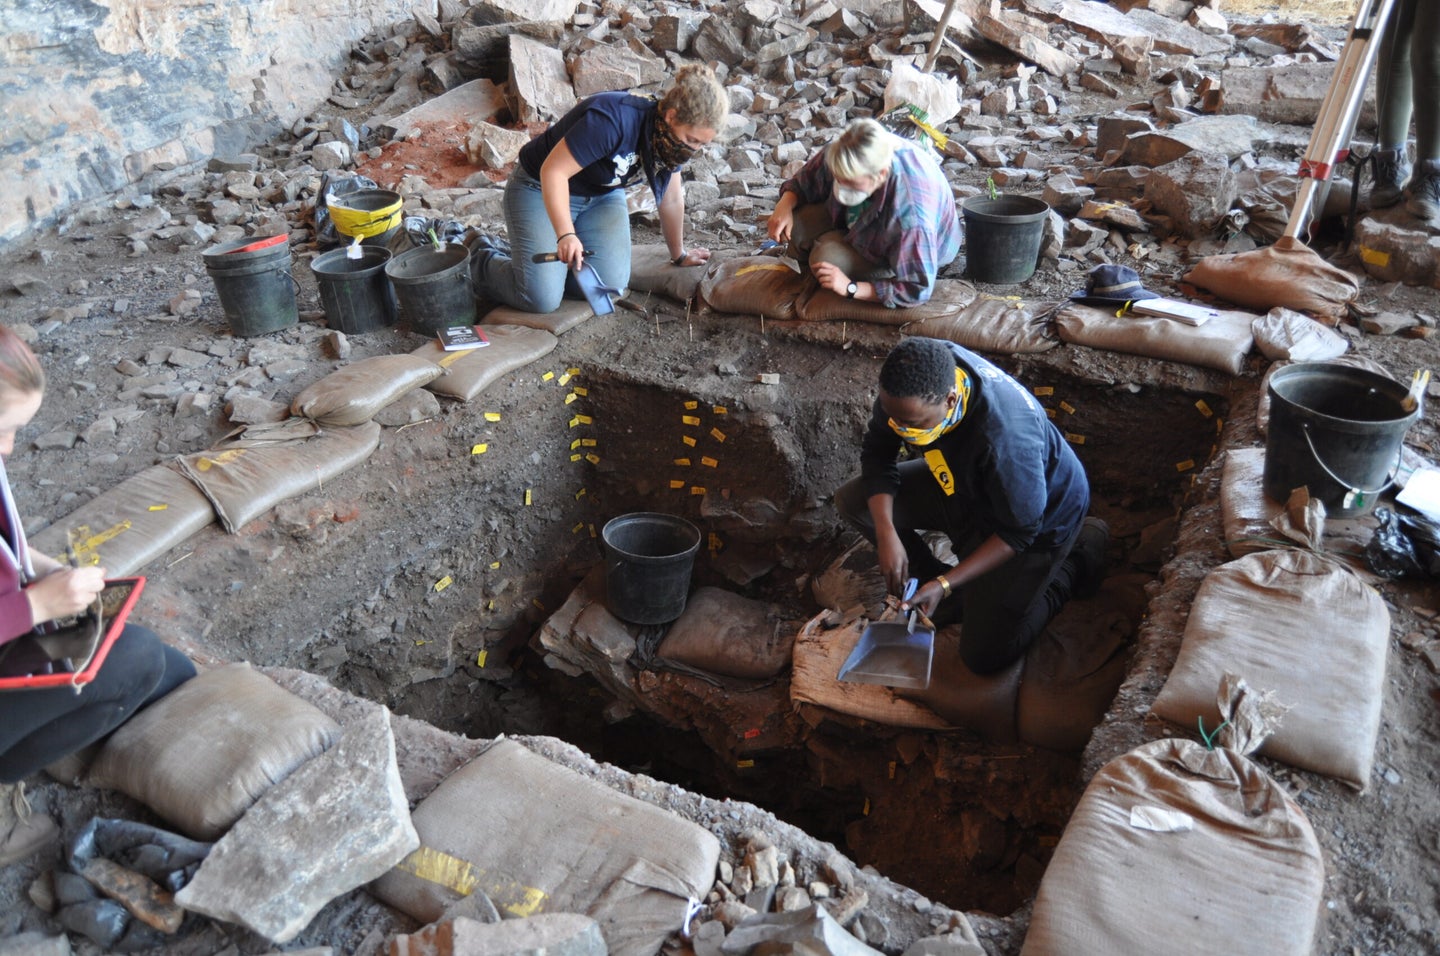 A view of the researchers digging at the excavation site.site